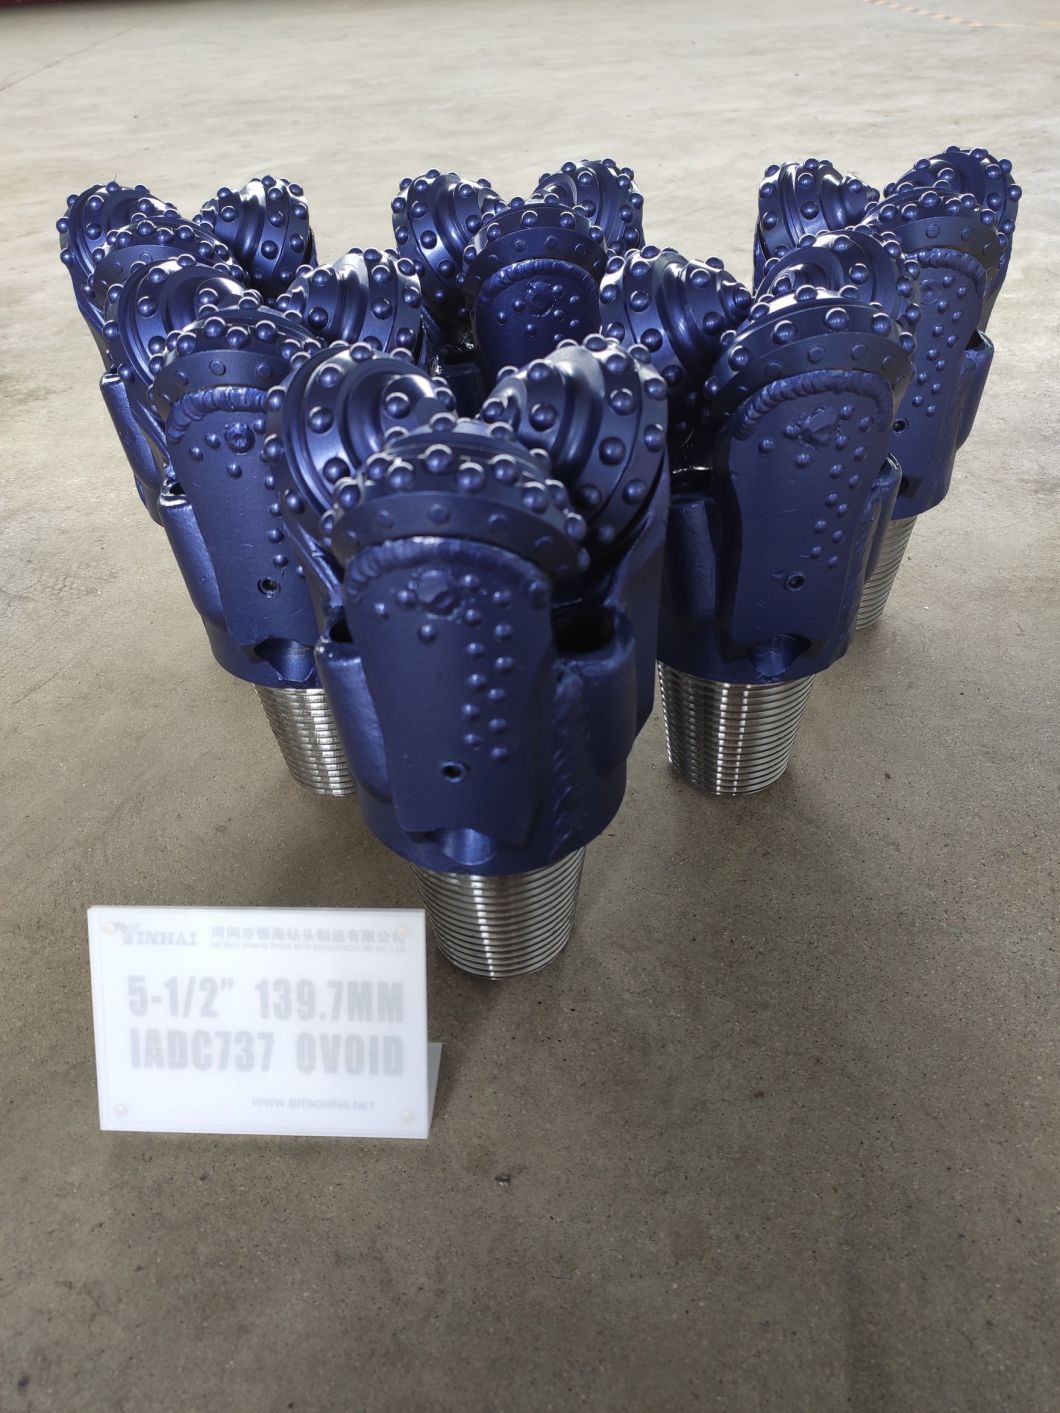 5 1/2" TCI Tricone Bit for Hard Formation Drilling